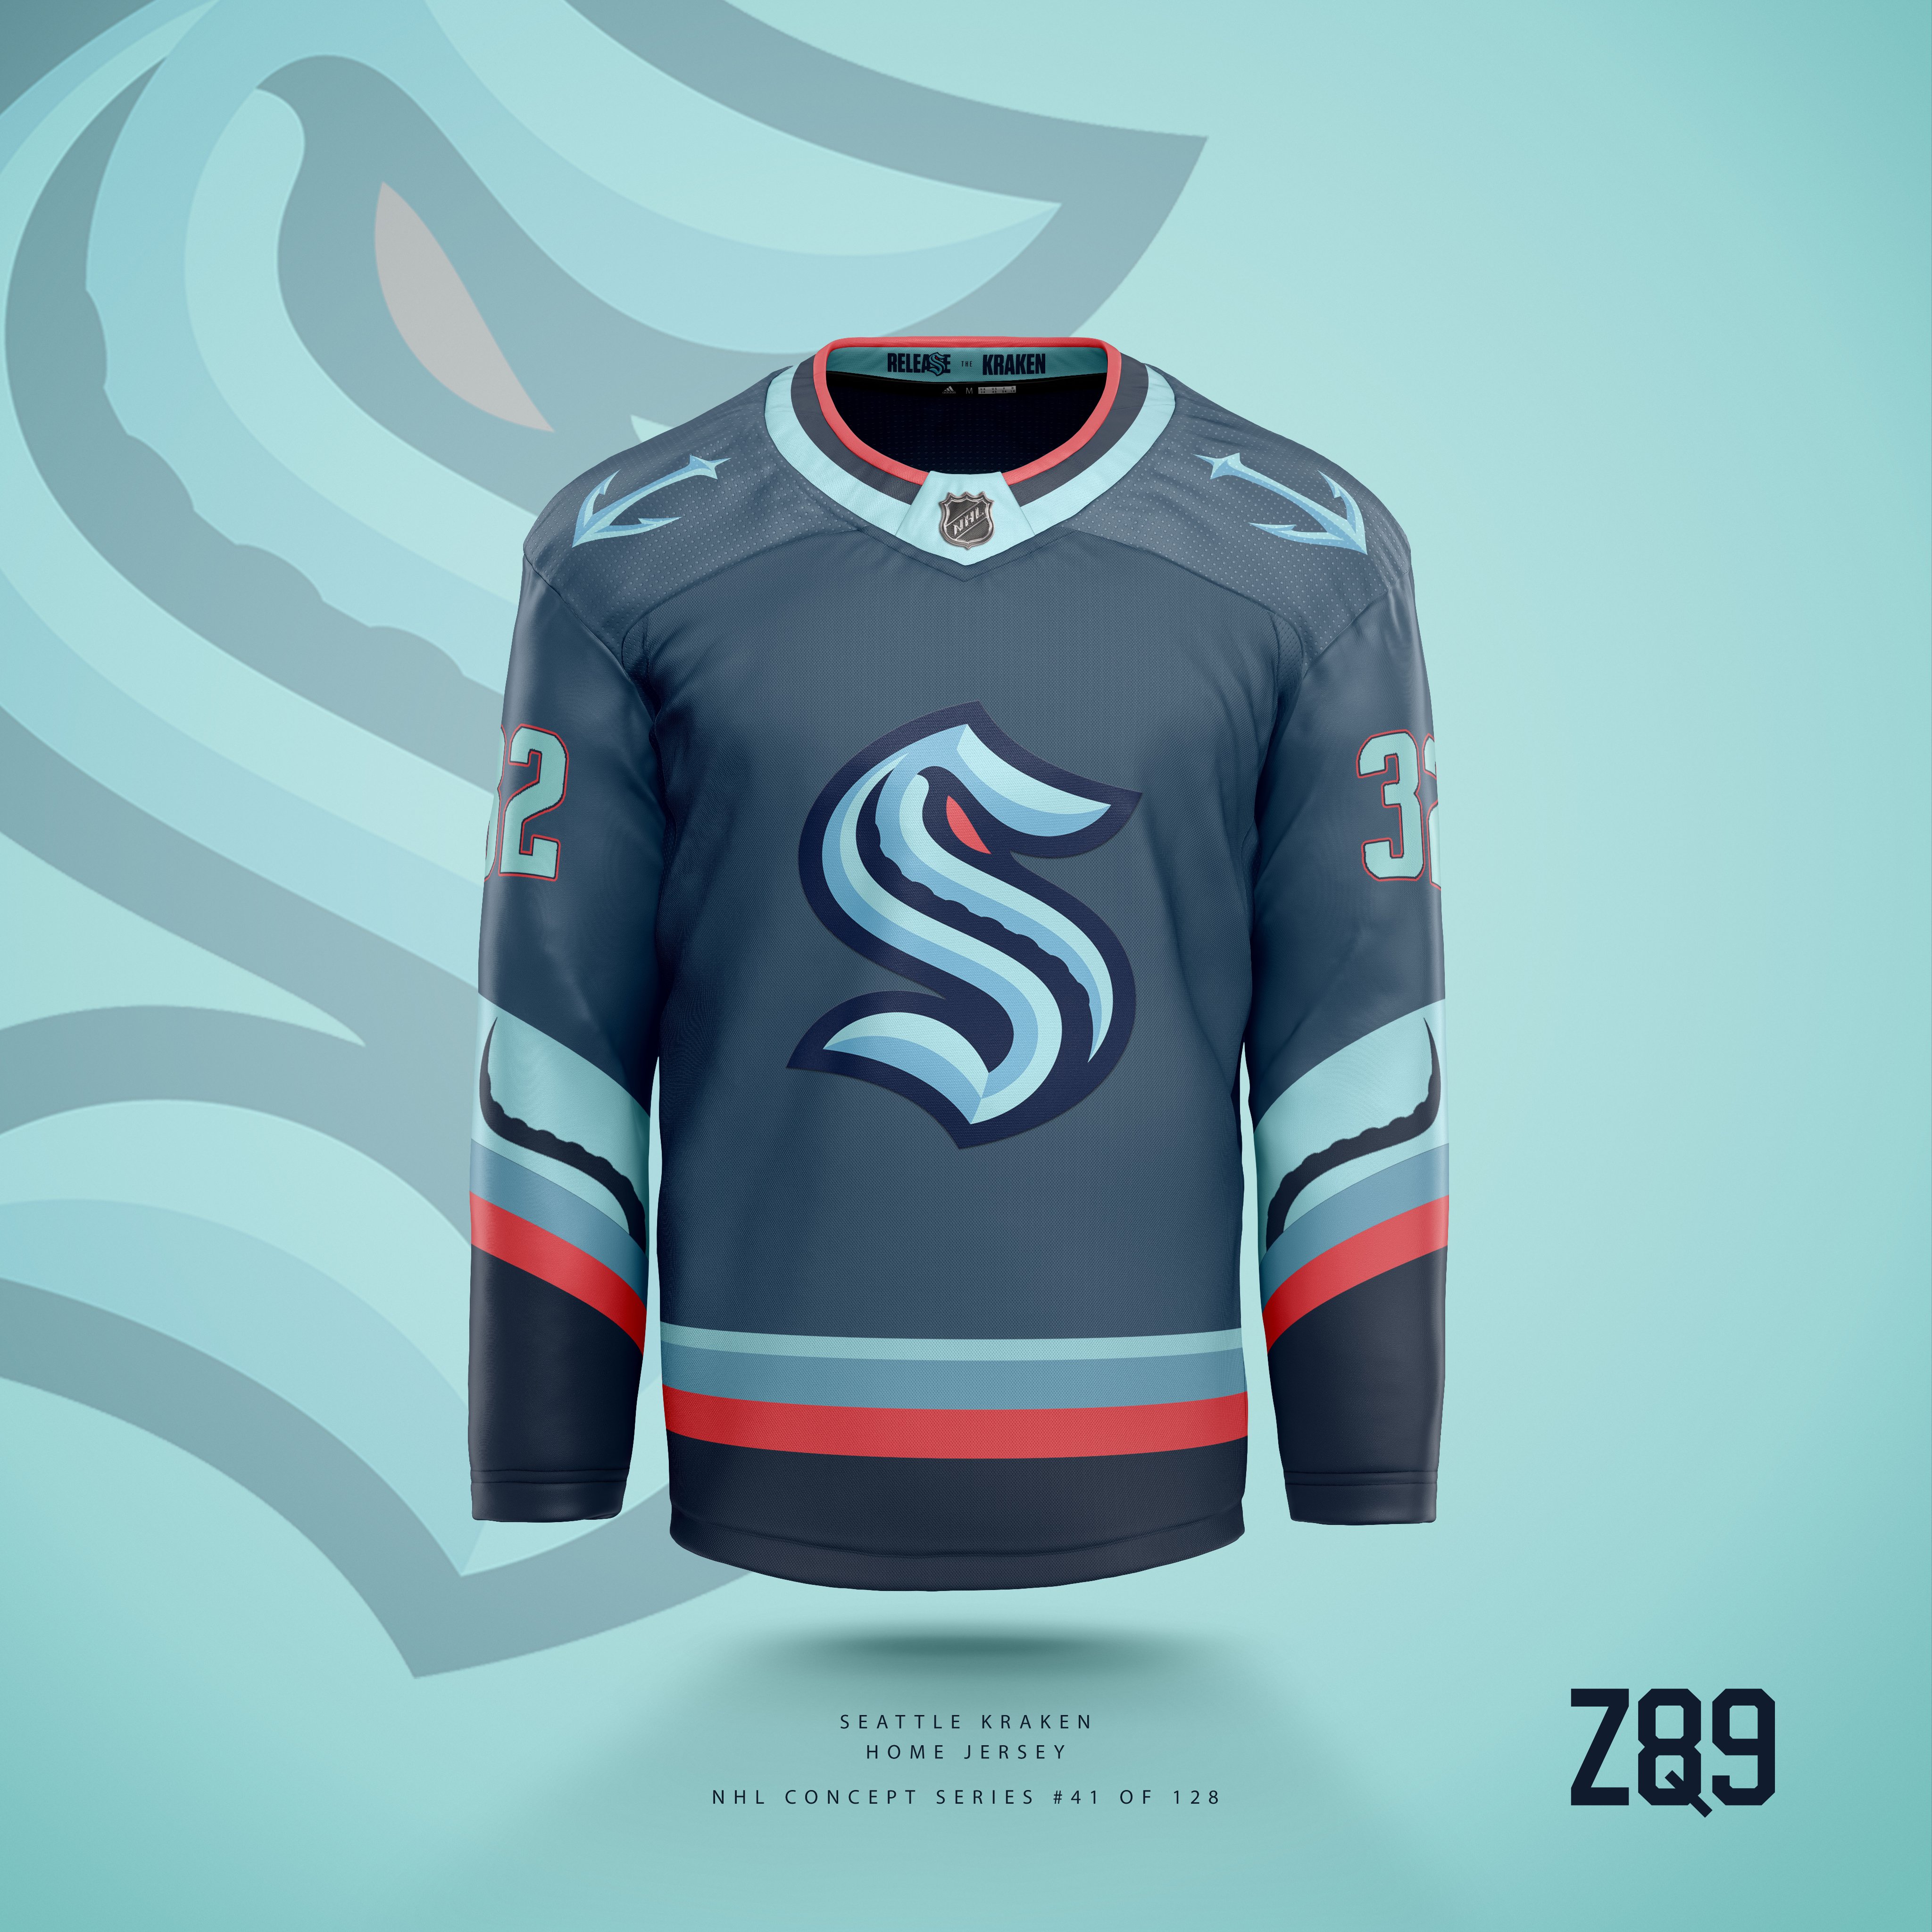 Z89Design on Twitter: "For the home set, I wanted to use a unique color, so  I took the "Boundless Blue" from the unveiled scheme and used it as the  primary. I'm ok